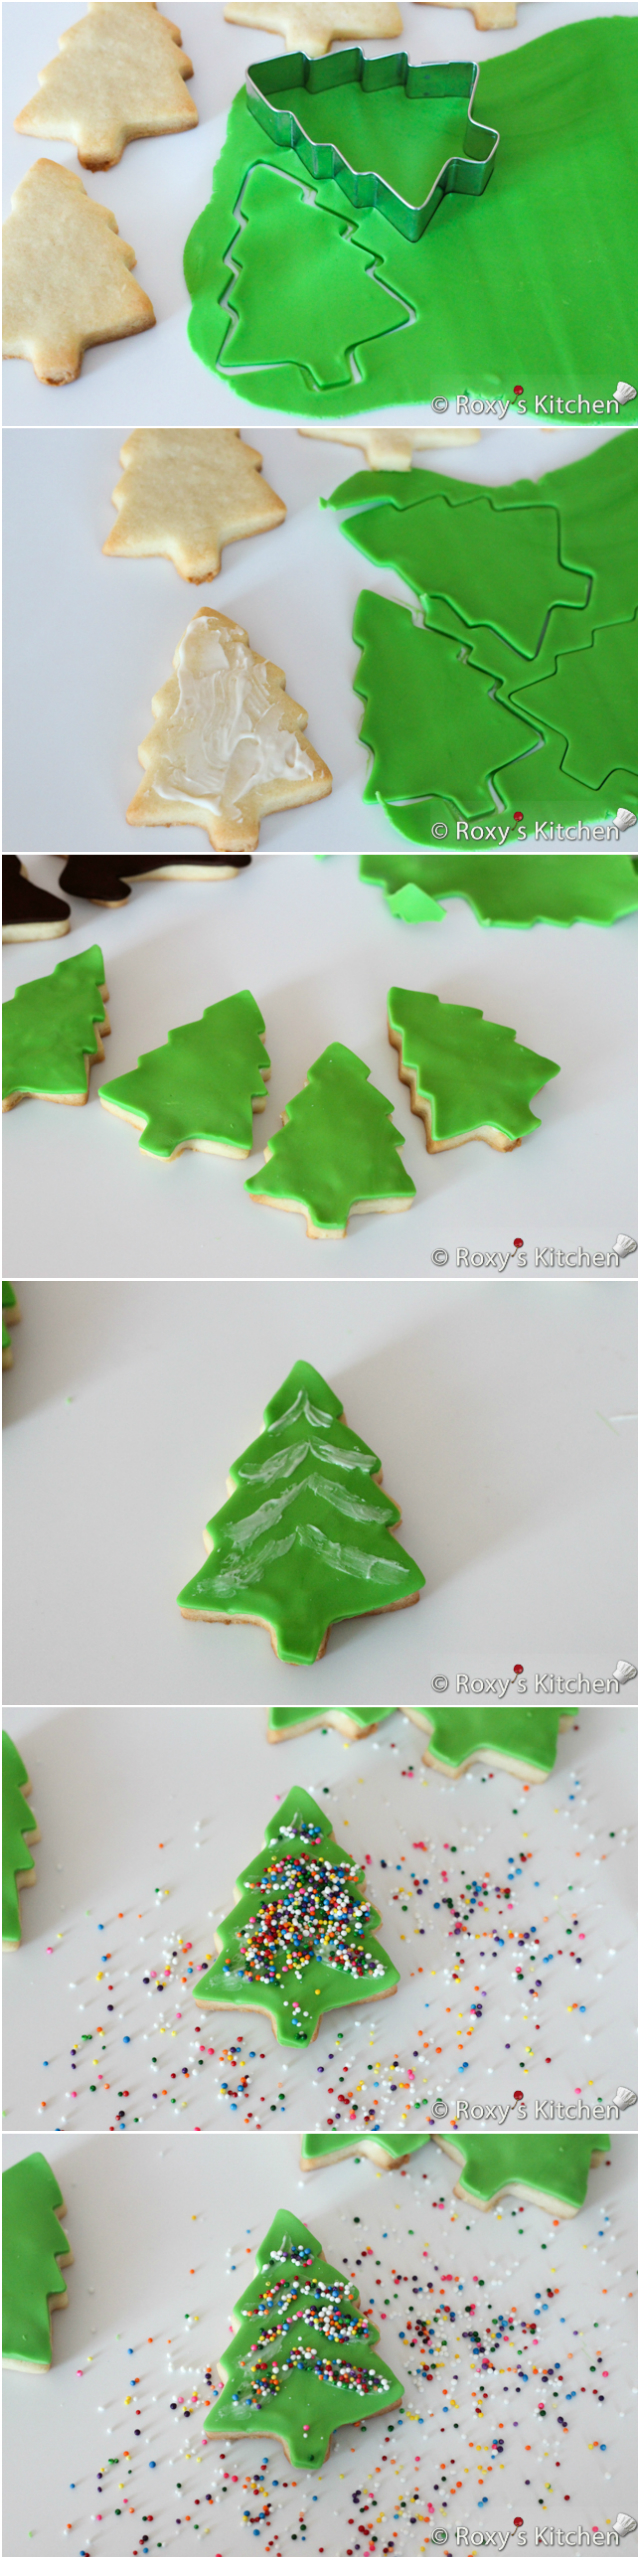 Christmas Tree Cookies --- Christmas Sugar Cookies Covered with Modeling Chocolate - HO HO HO, snowmen, reindeer, Christmas trees, stockings & presents | Roxy's Kitchen